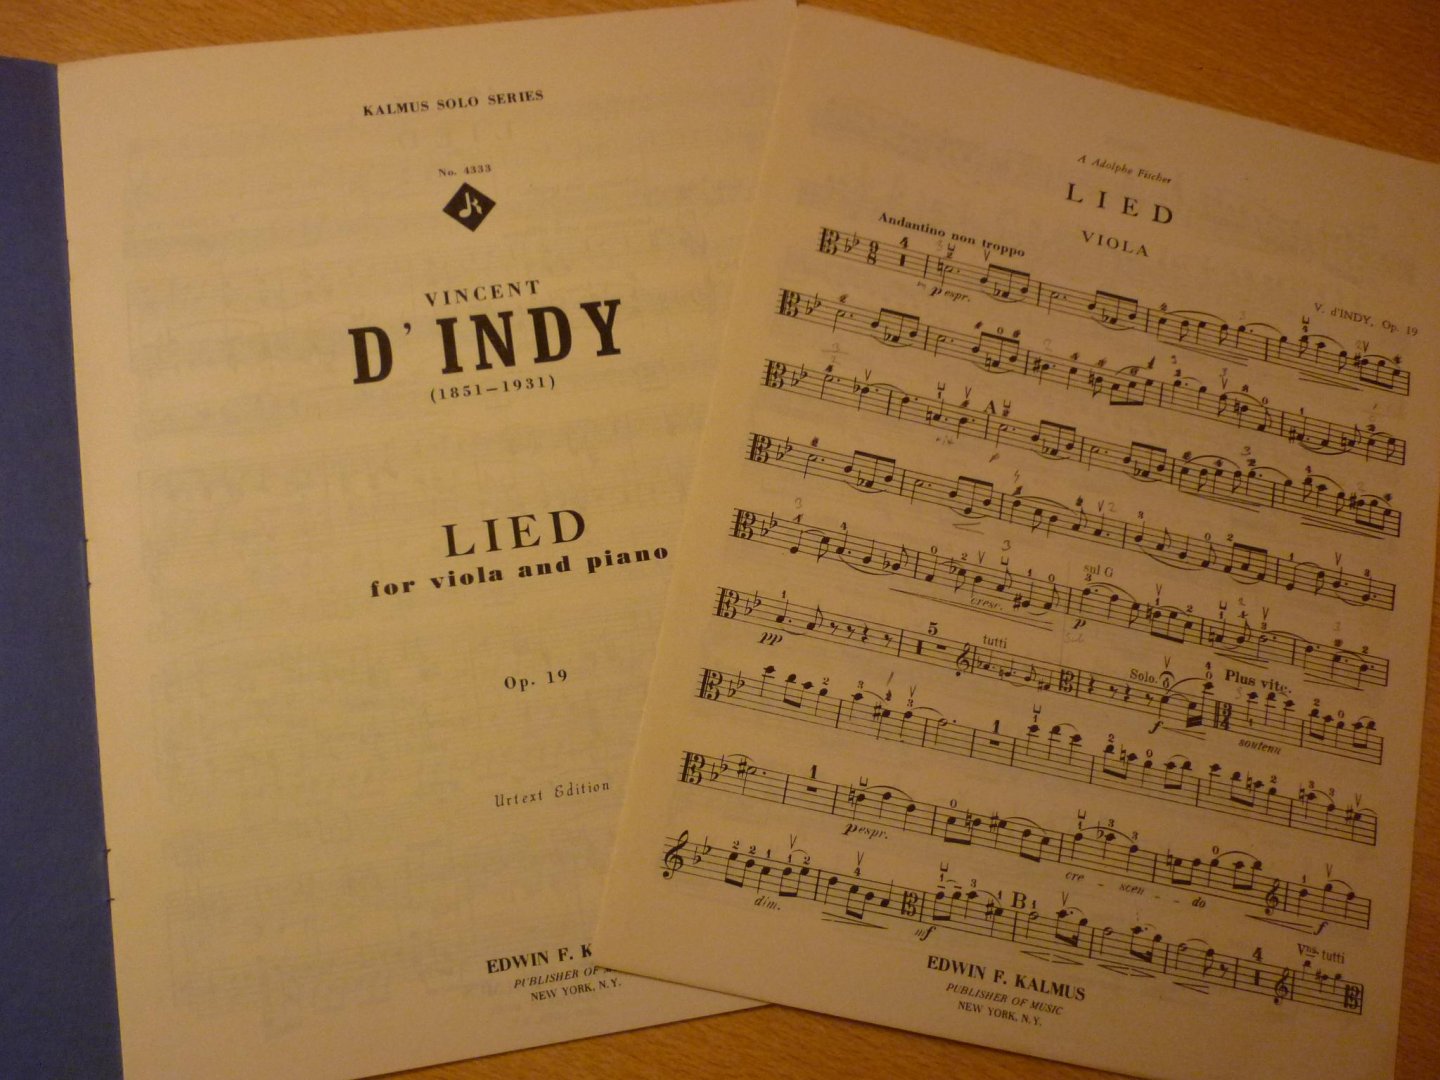 d’Indy; Vincent (1851-1931) - Lied for viola and piano; Opus 19; Urtext Edition